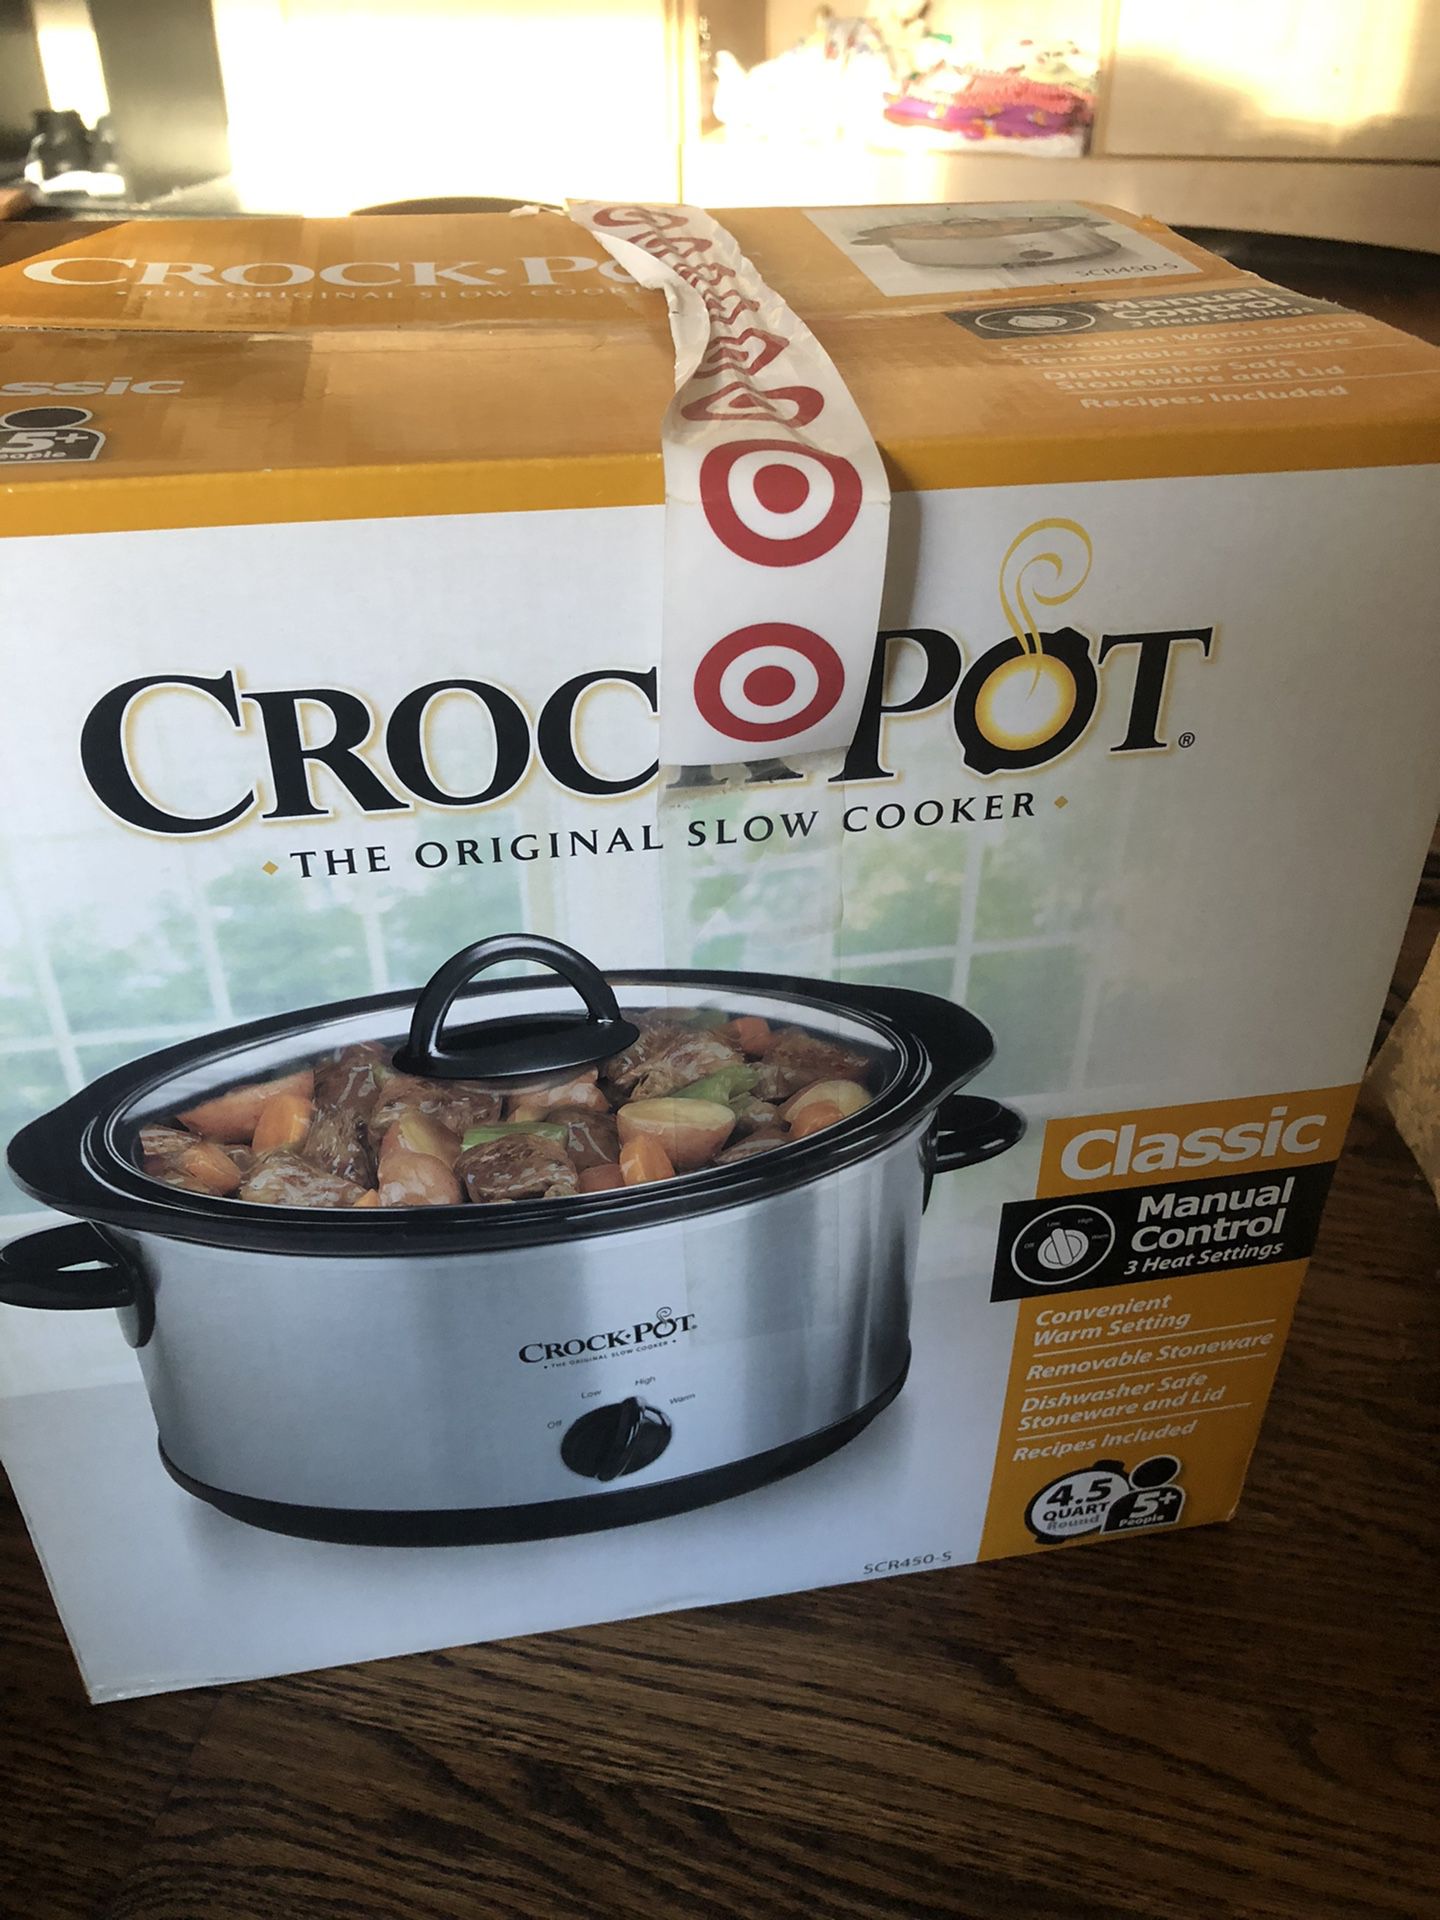 4.5 Quart Slow Cooker - PLEASE READ CAREFULLY! for Sale in Chula